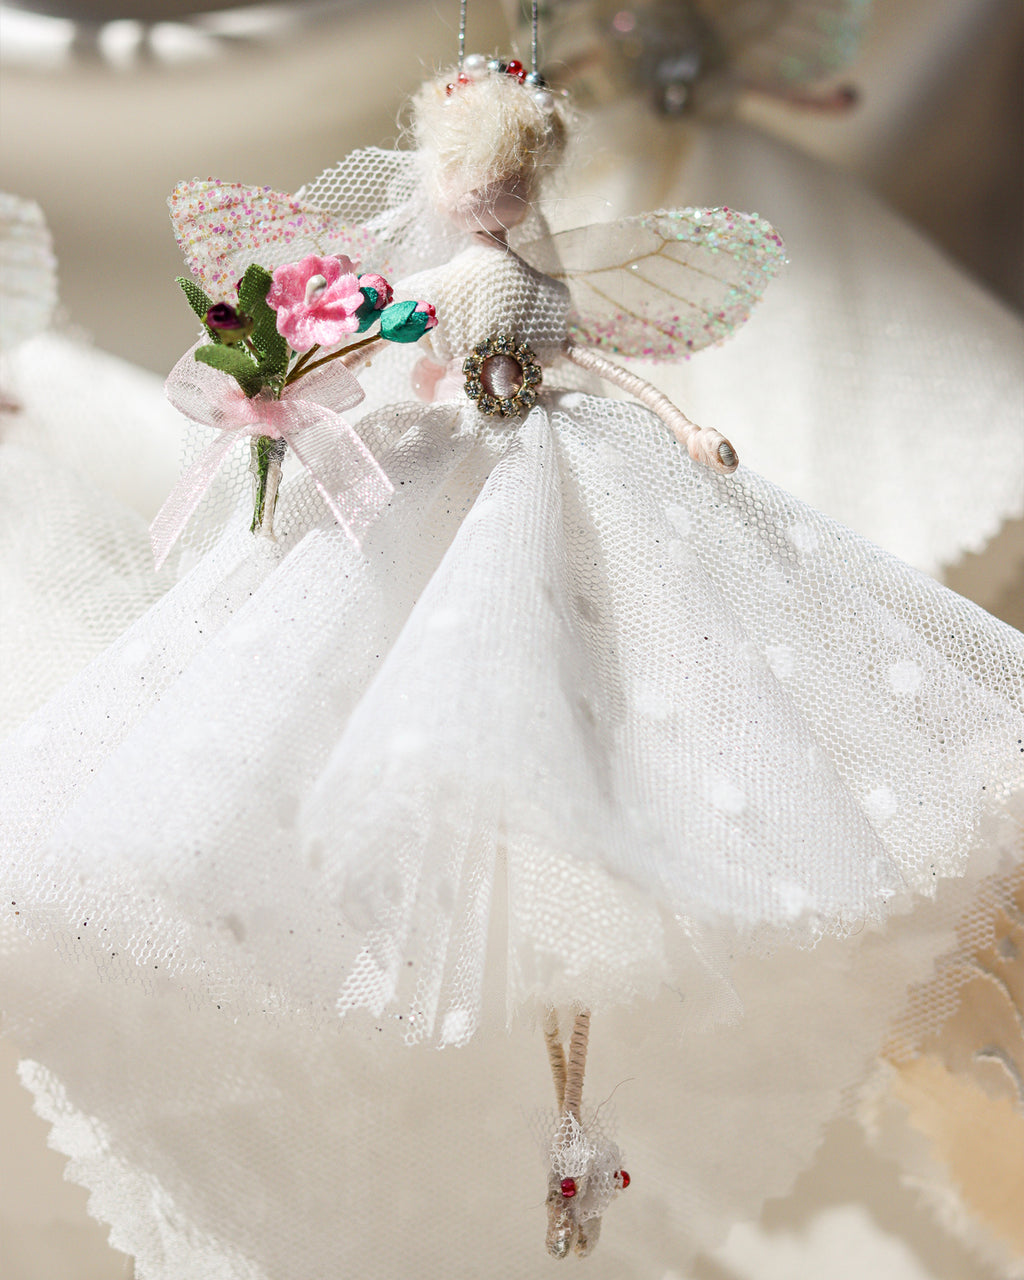 The Florialice Fairy Bride is a unique, one-of-a-kind product, handmade by a bridal designer from all her cherished fabrics. It is an item to treasure, a special family heirloom. As each fairy is handmade and unique.